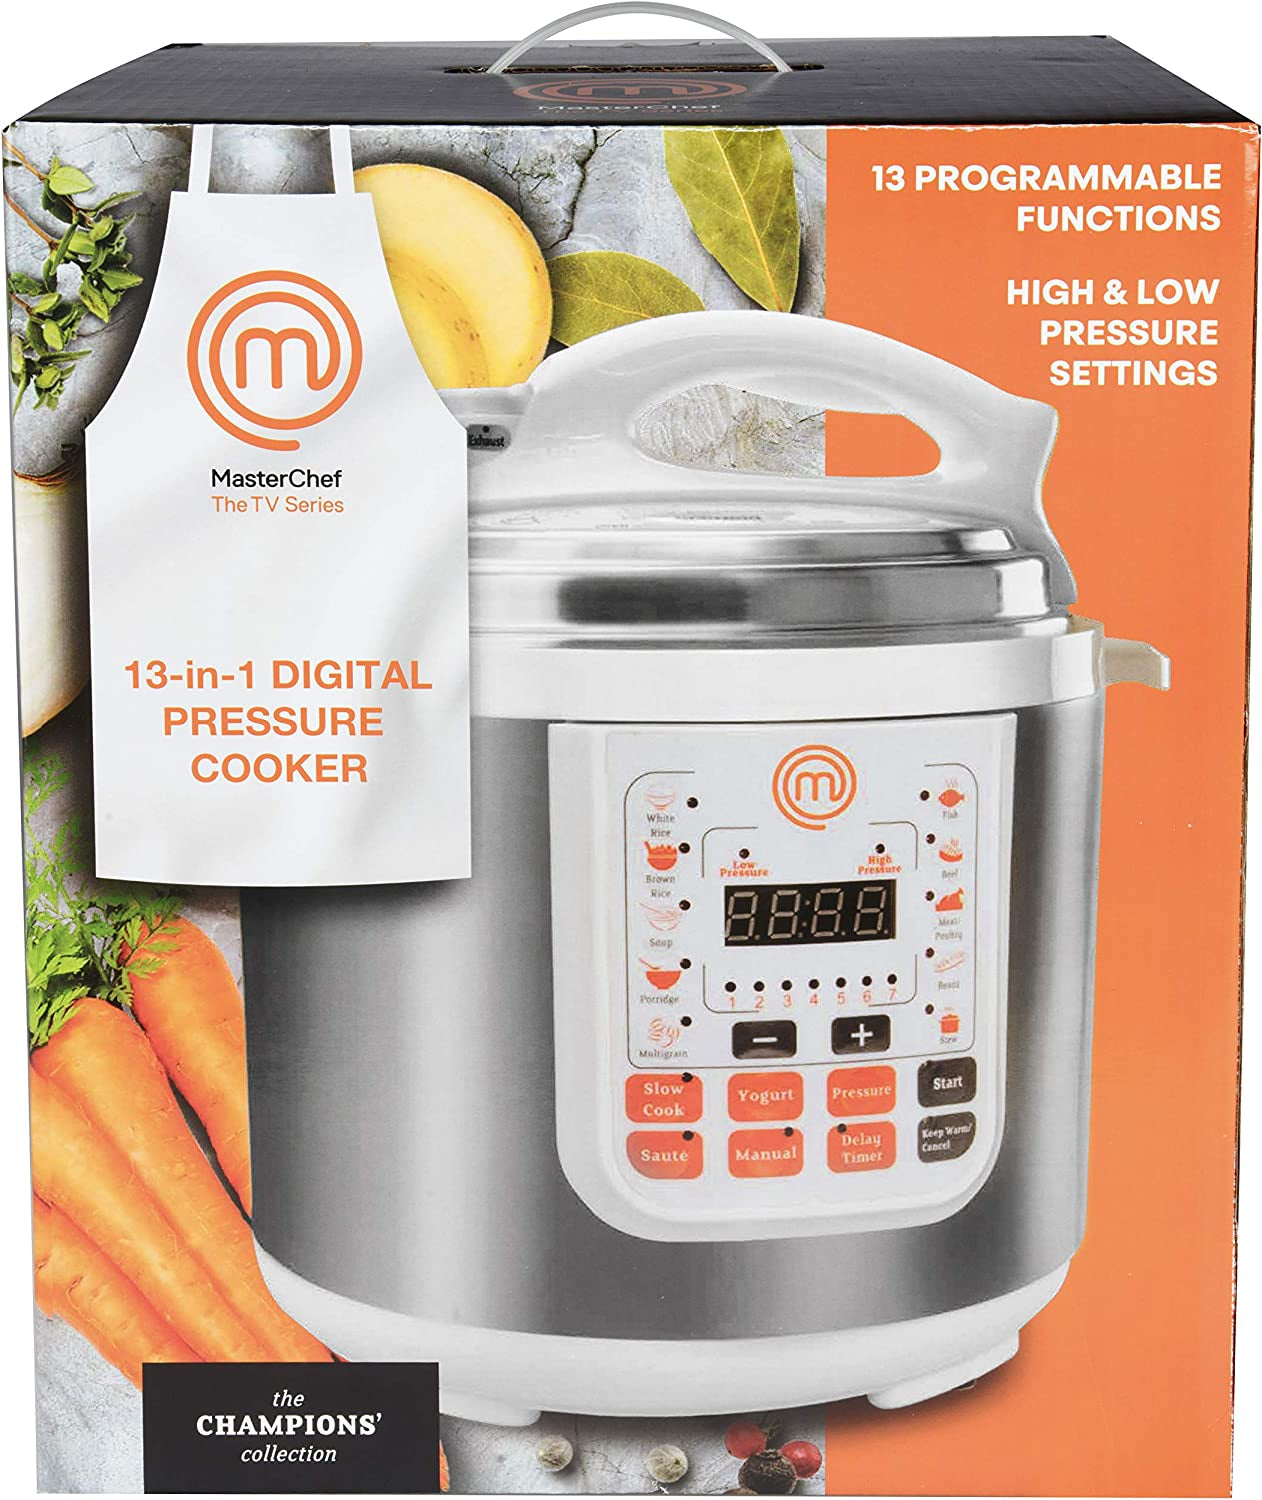 Masterchef 13-In-1 Pressure Cooker- 6 QT Electric Digital Instant Multipot W 13 Programmable Functions- High and Low Pressure Slow Non-Stick Pot Cooking Warmer Options, LED Display, Delay Timer, Rice